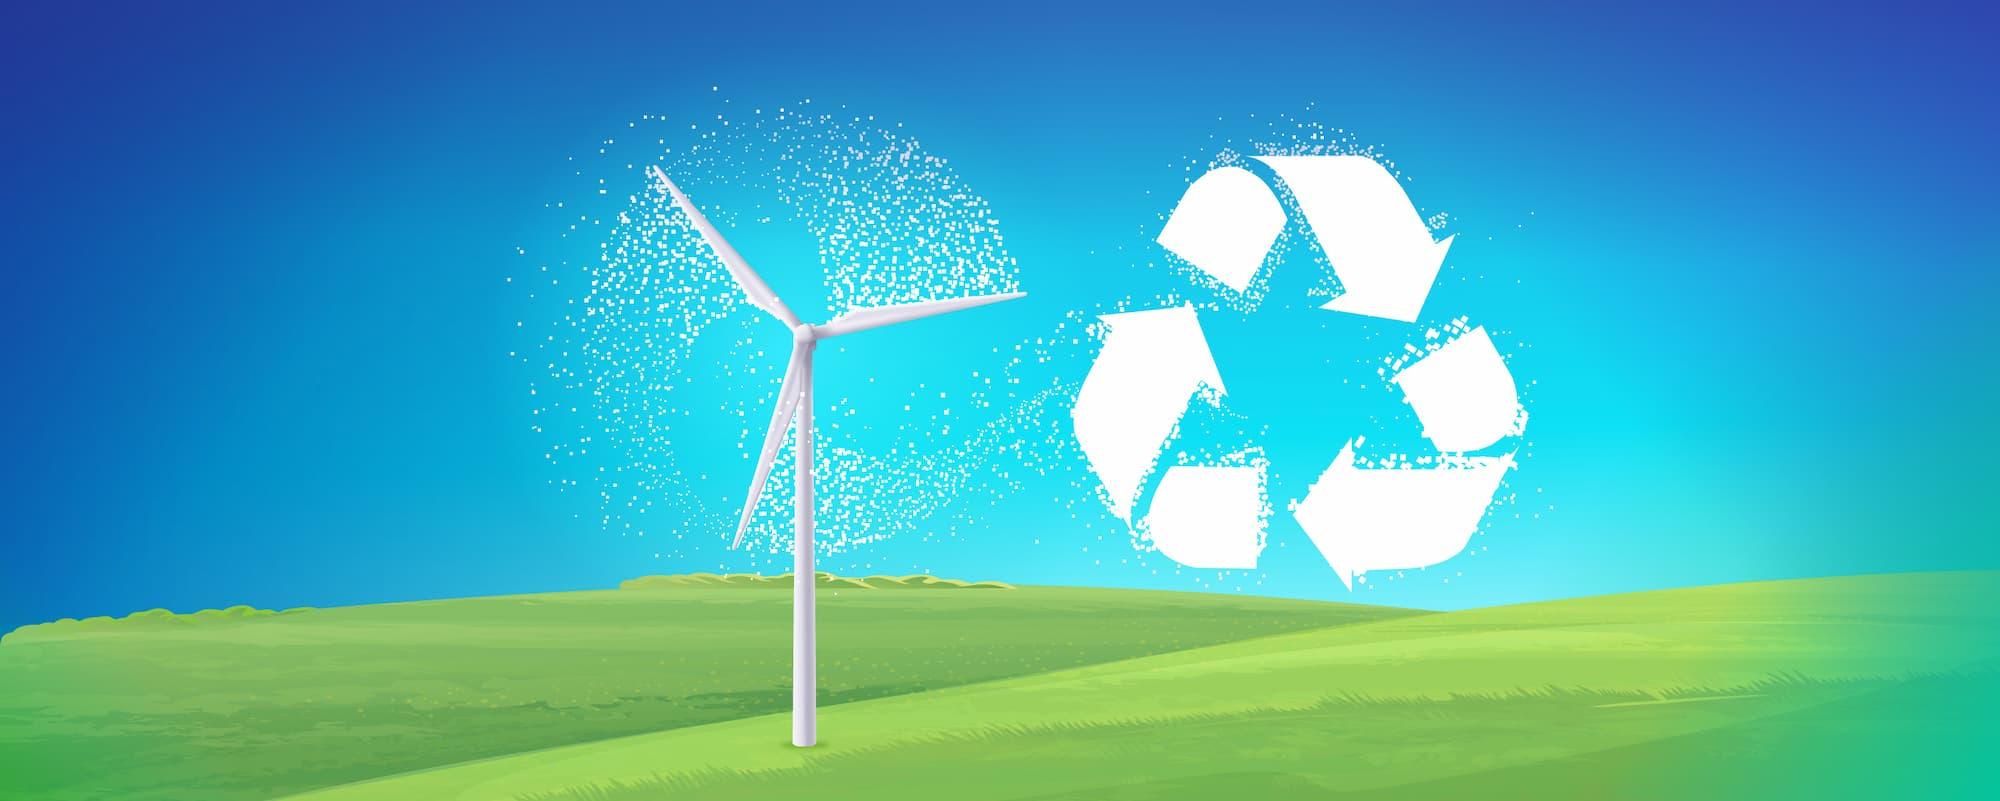 wind turbine and recycling sign in a field